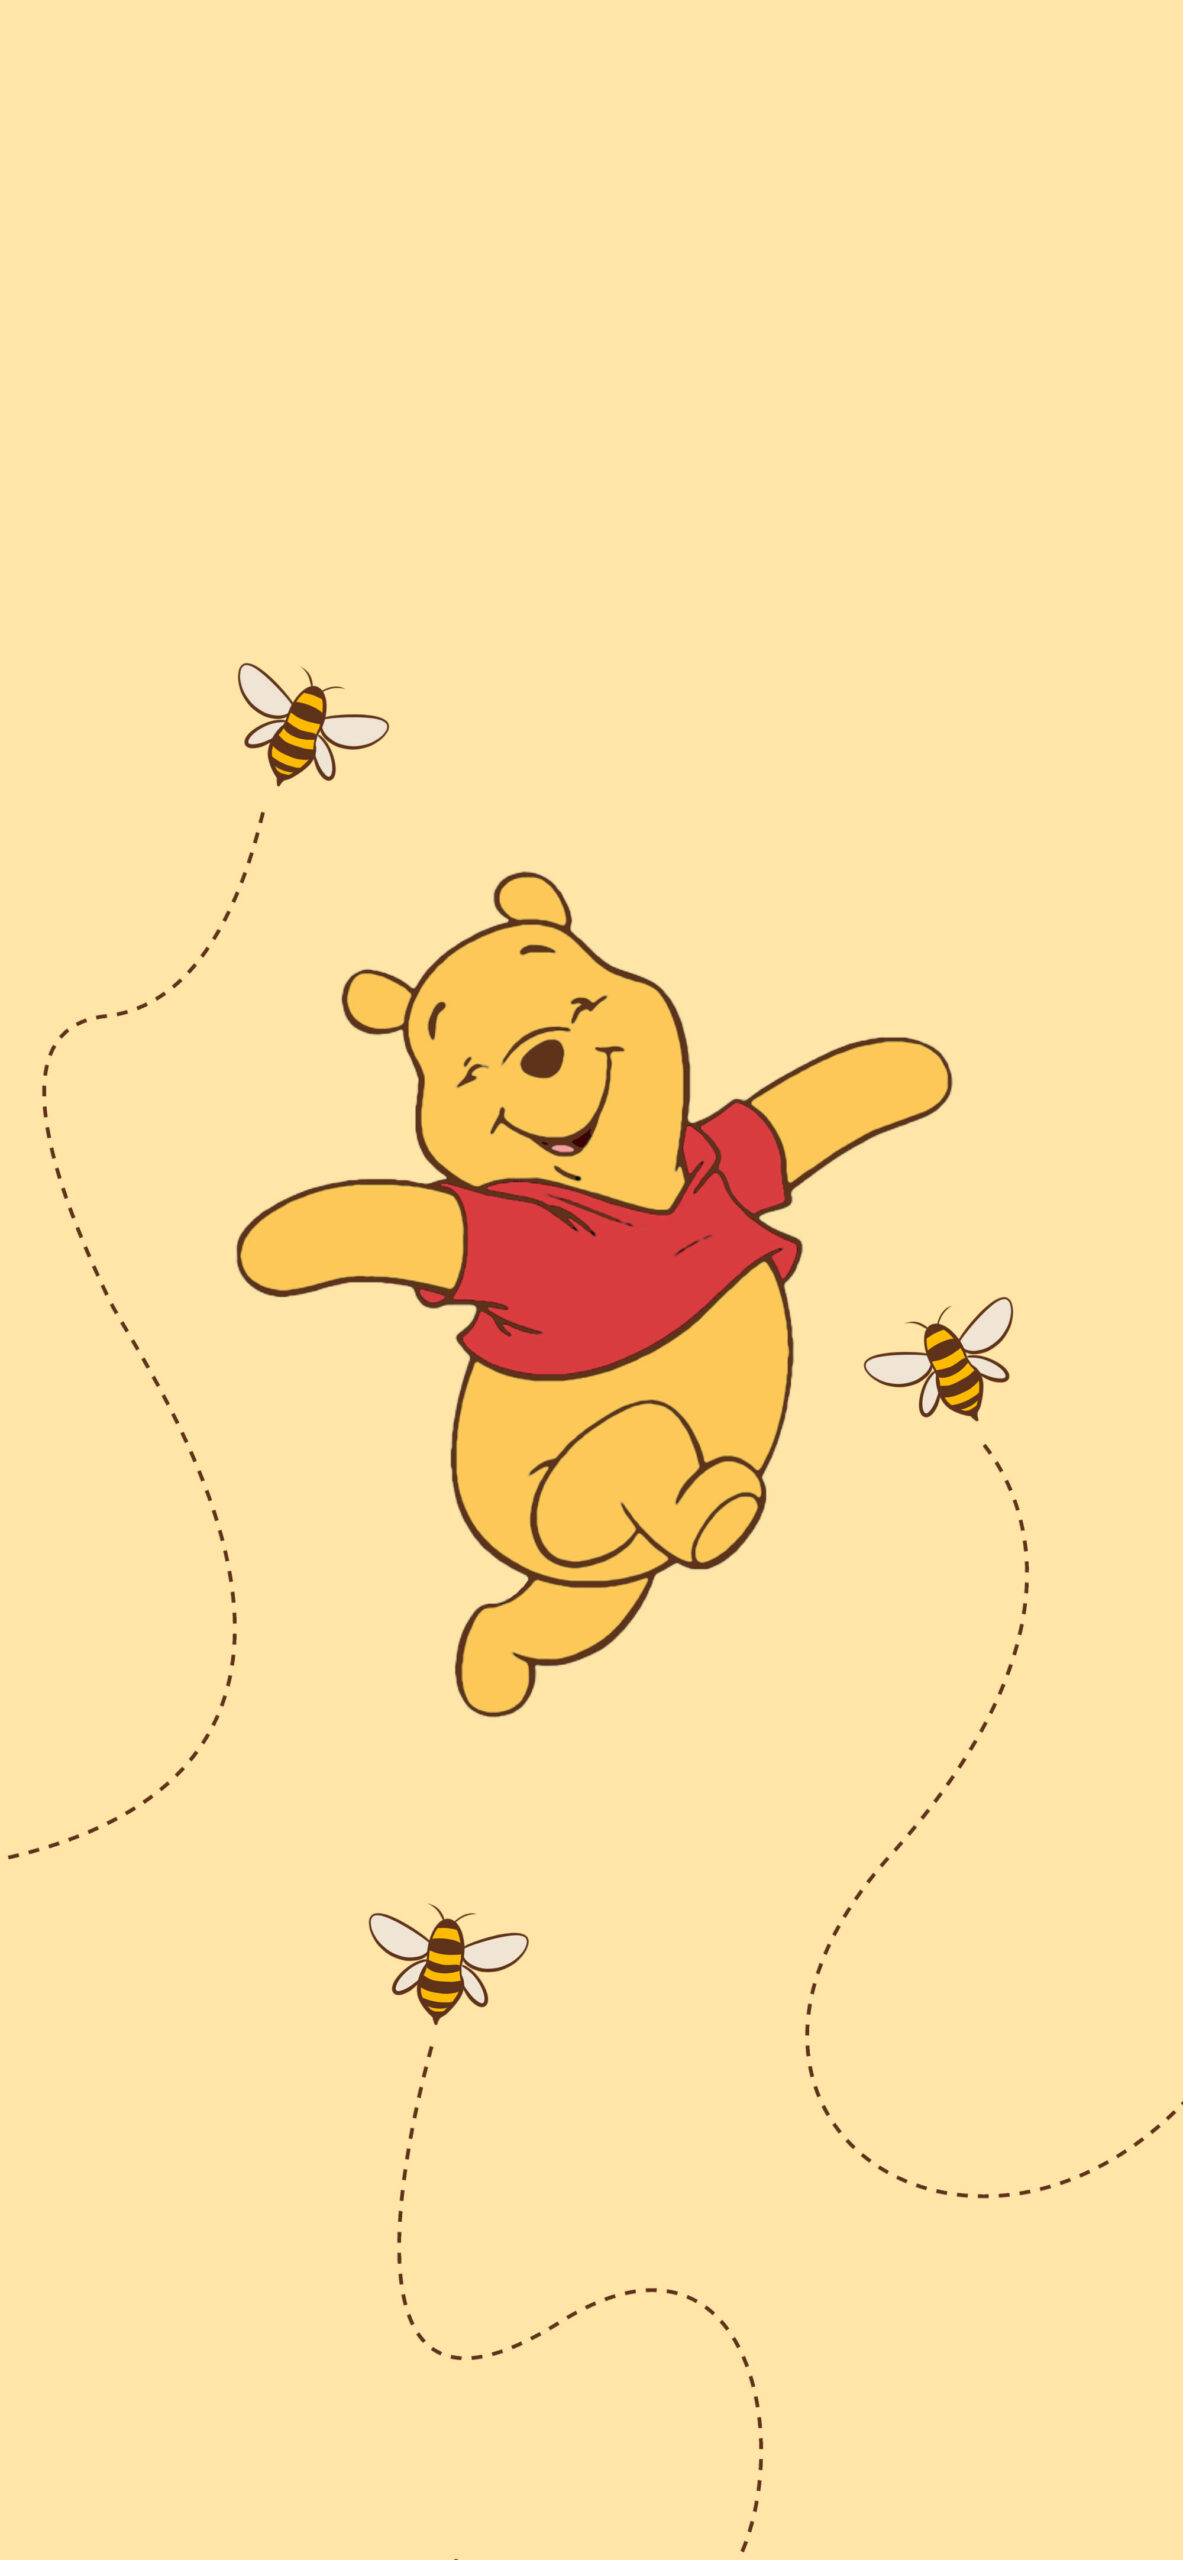 Winnie the Pooh Yellow Wallpapers - Winnie the Pooh Wallpapers